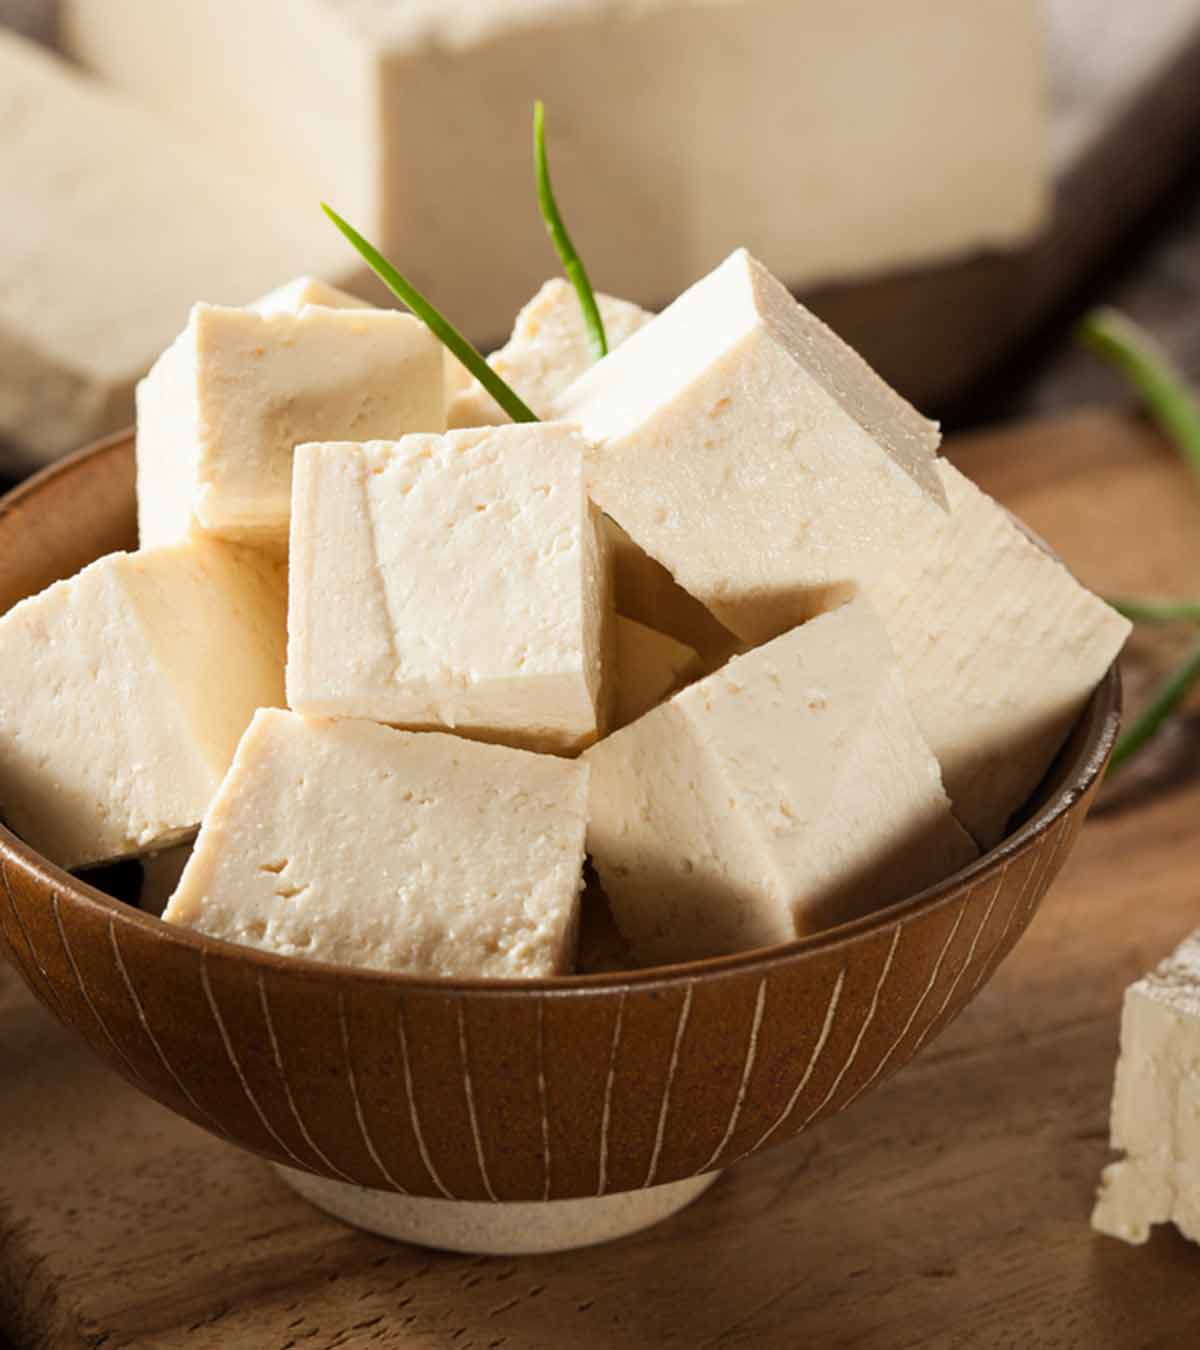 Tofu For Babies: When To Introduce, Health Benefits And Recipes